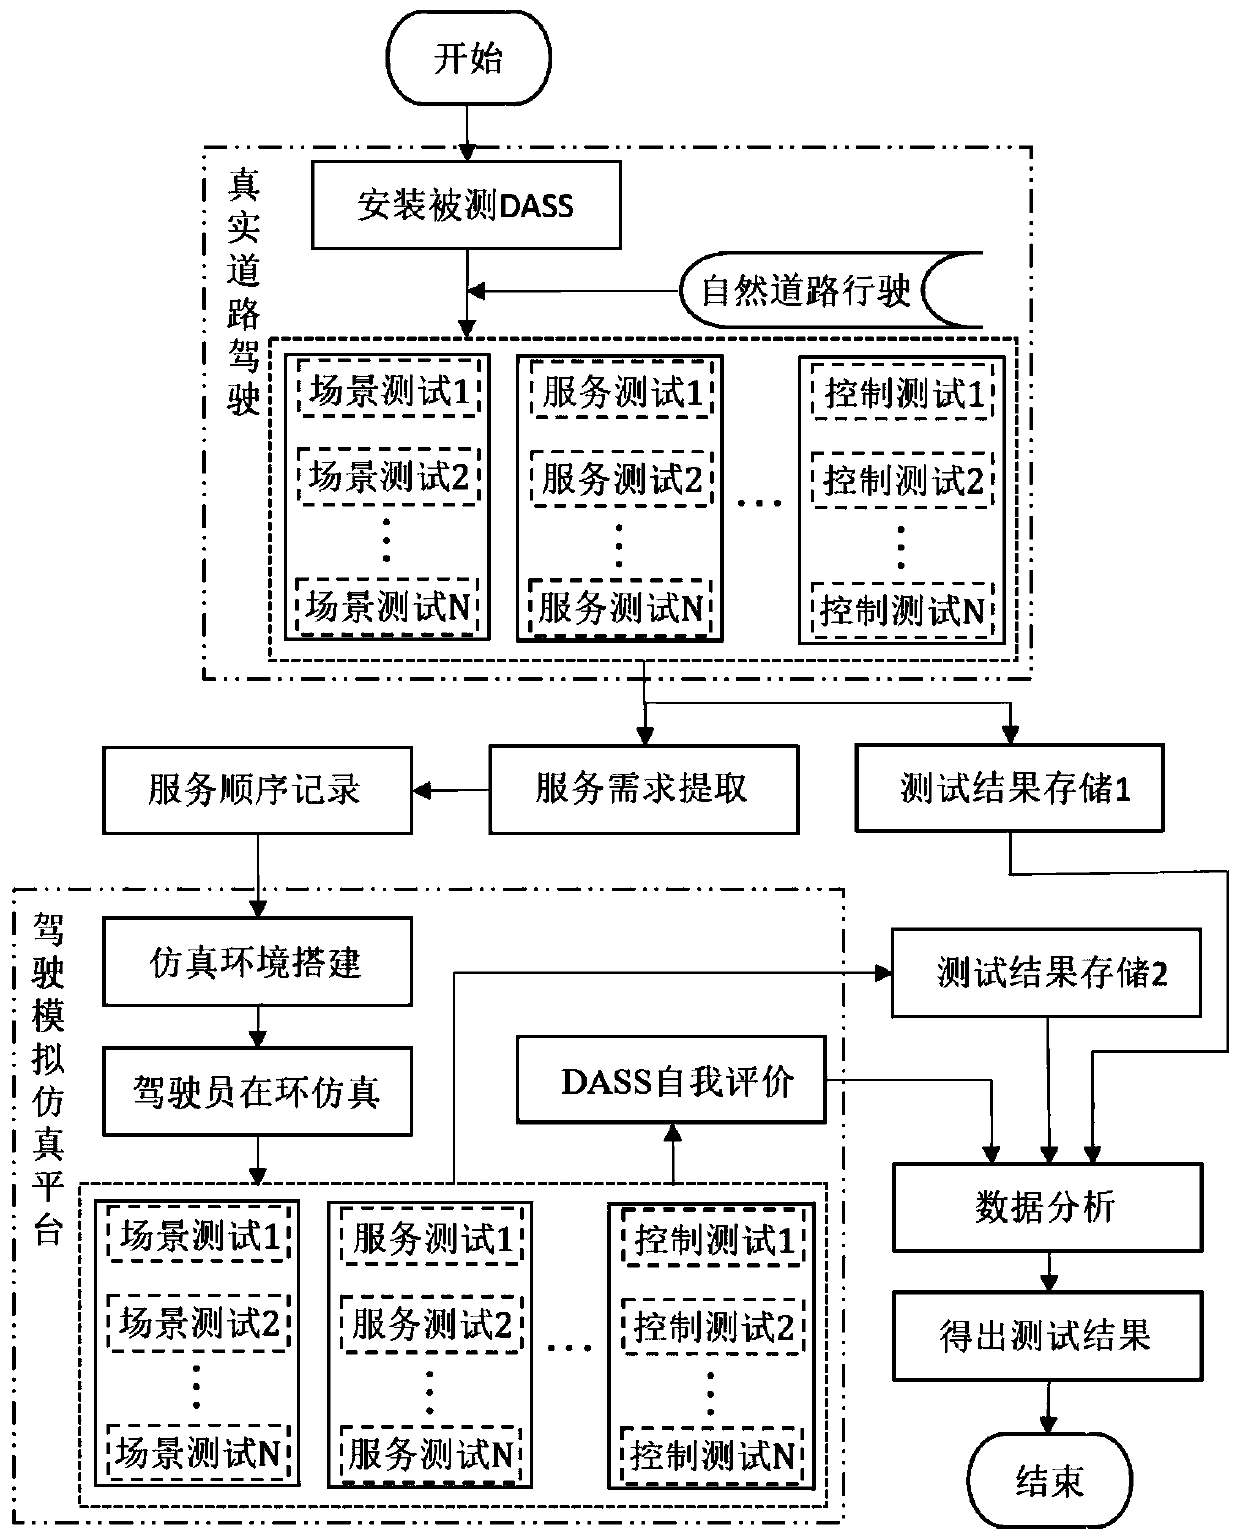 Driving active service system (DASS) testing and verification platform and testing method thereof